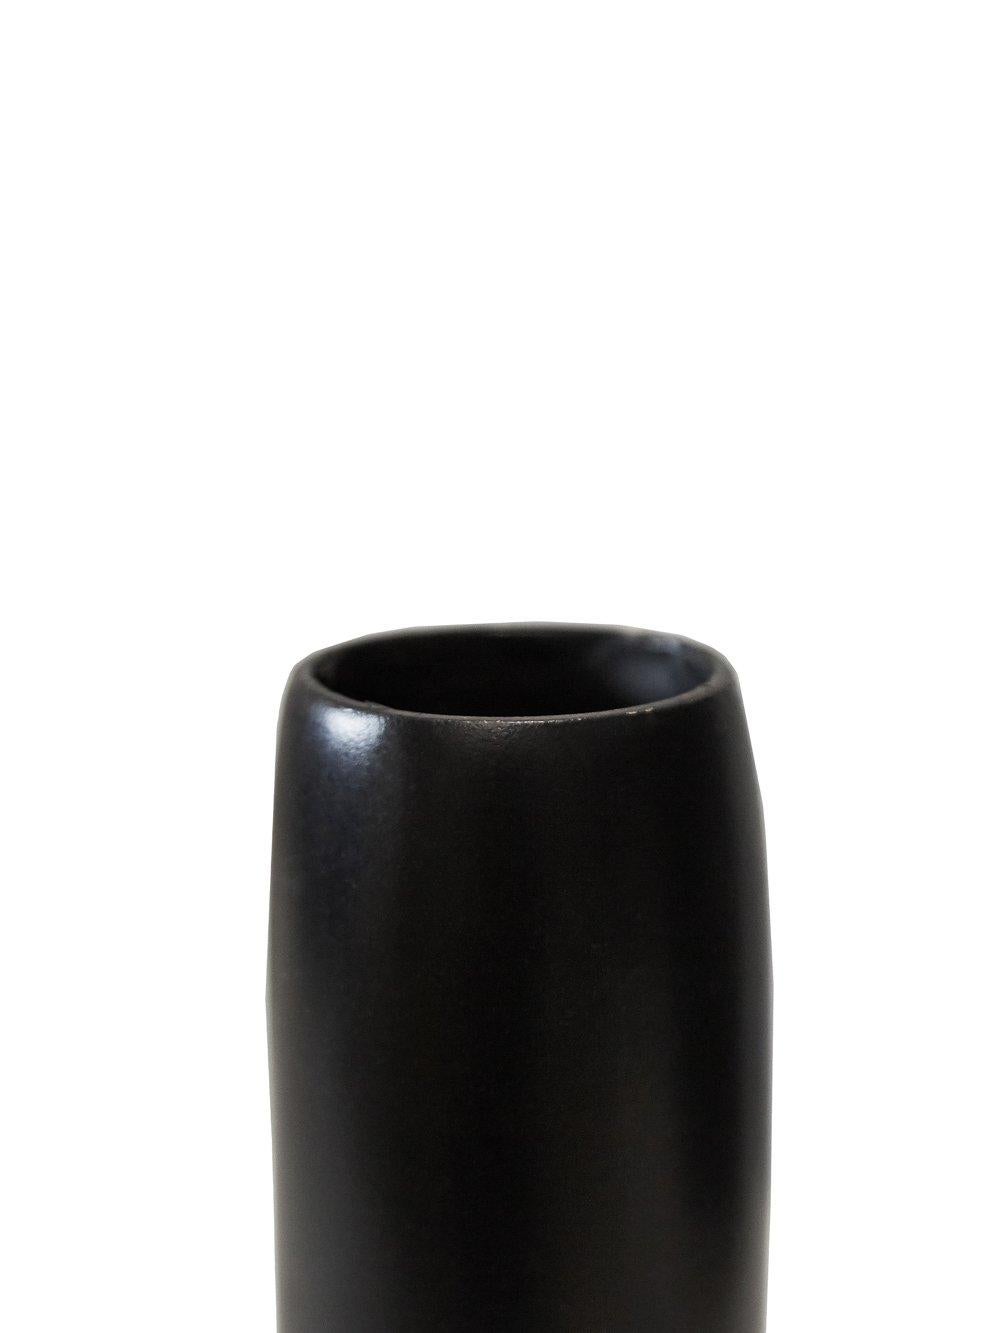 Bronze bud vase by Rick Owens
2019
Dimensions: L 9 x W 9 x H 16 cm
Materials: Bronze
Weight: 1.5 kg

Rick Owens is a California-born fashion and furniture has developed a unique style that he describes as “luxe minimalism.”
Though his designs